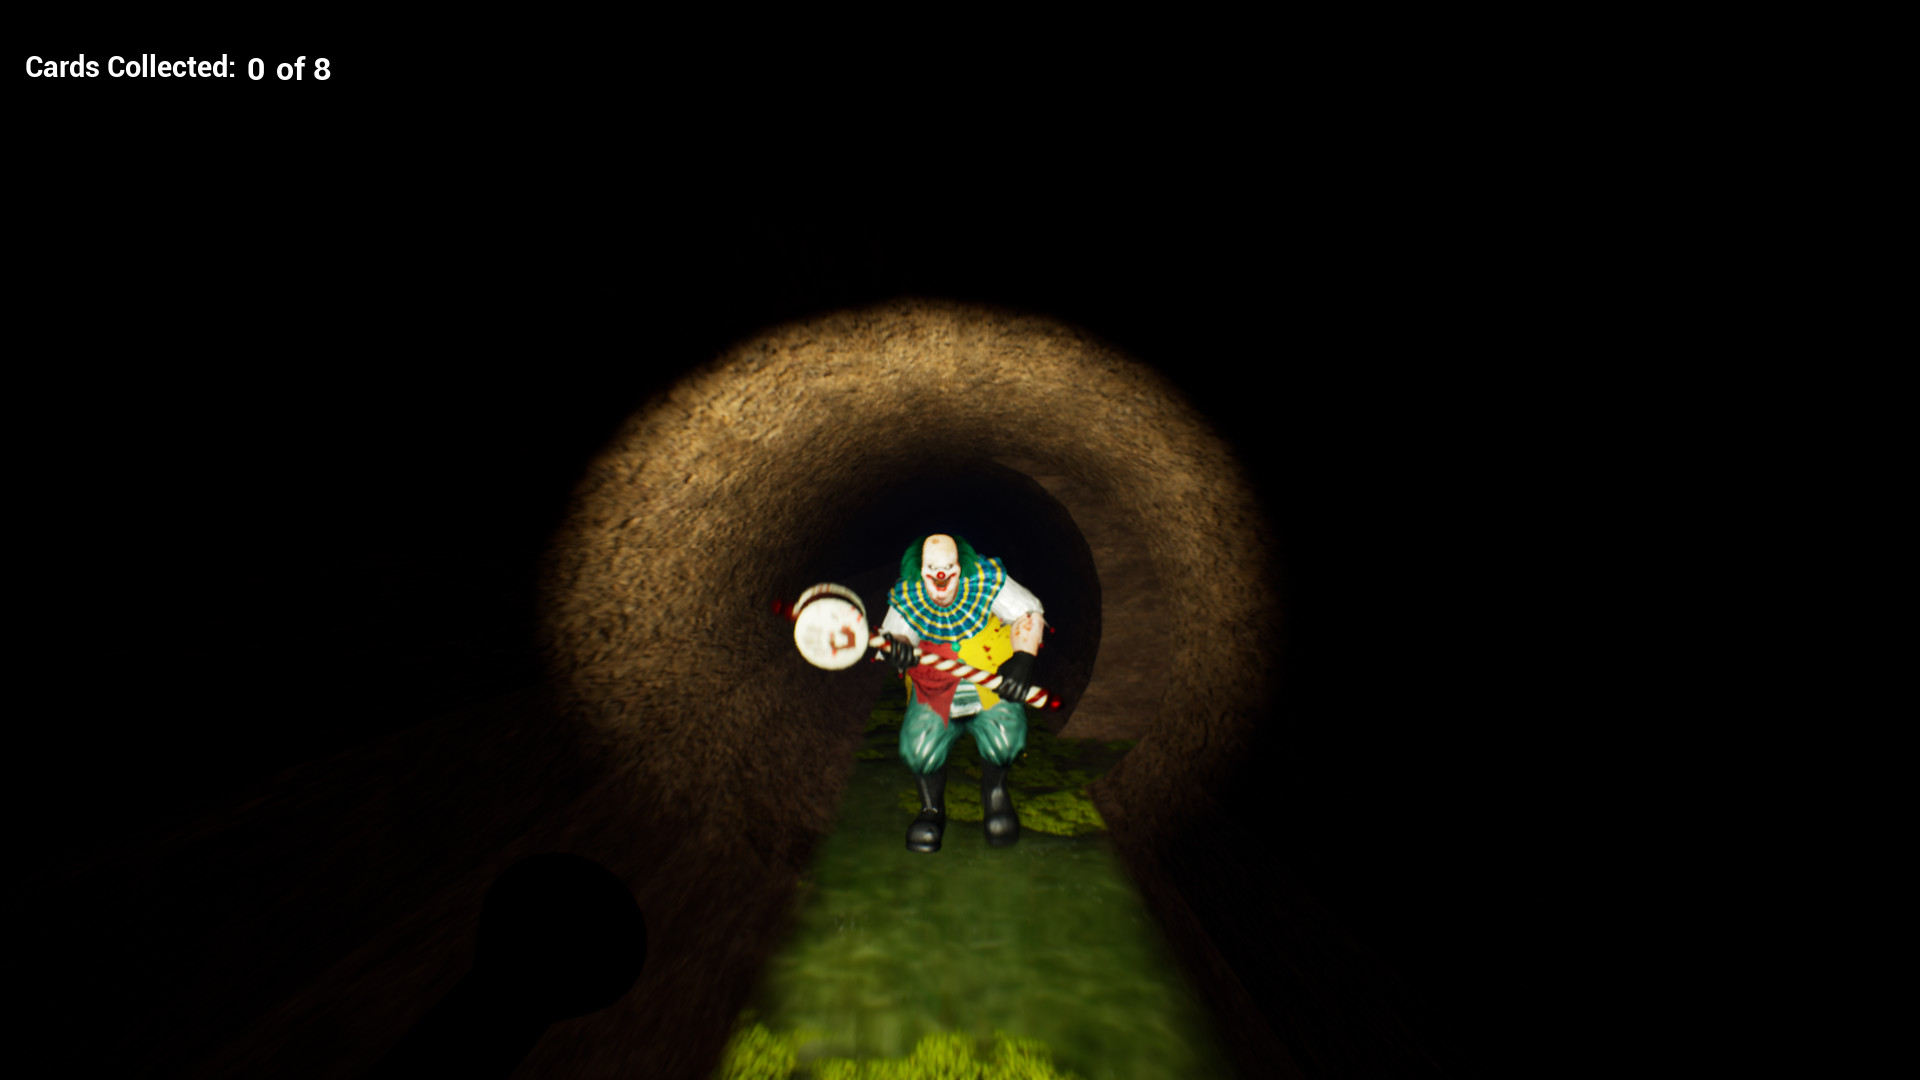 Scary Clown Game on the App Store